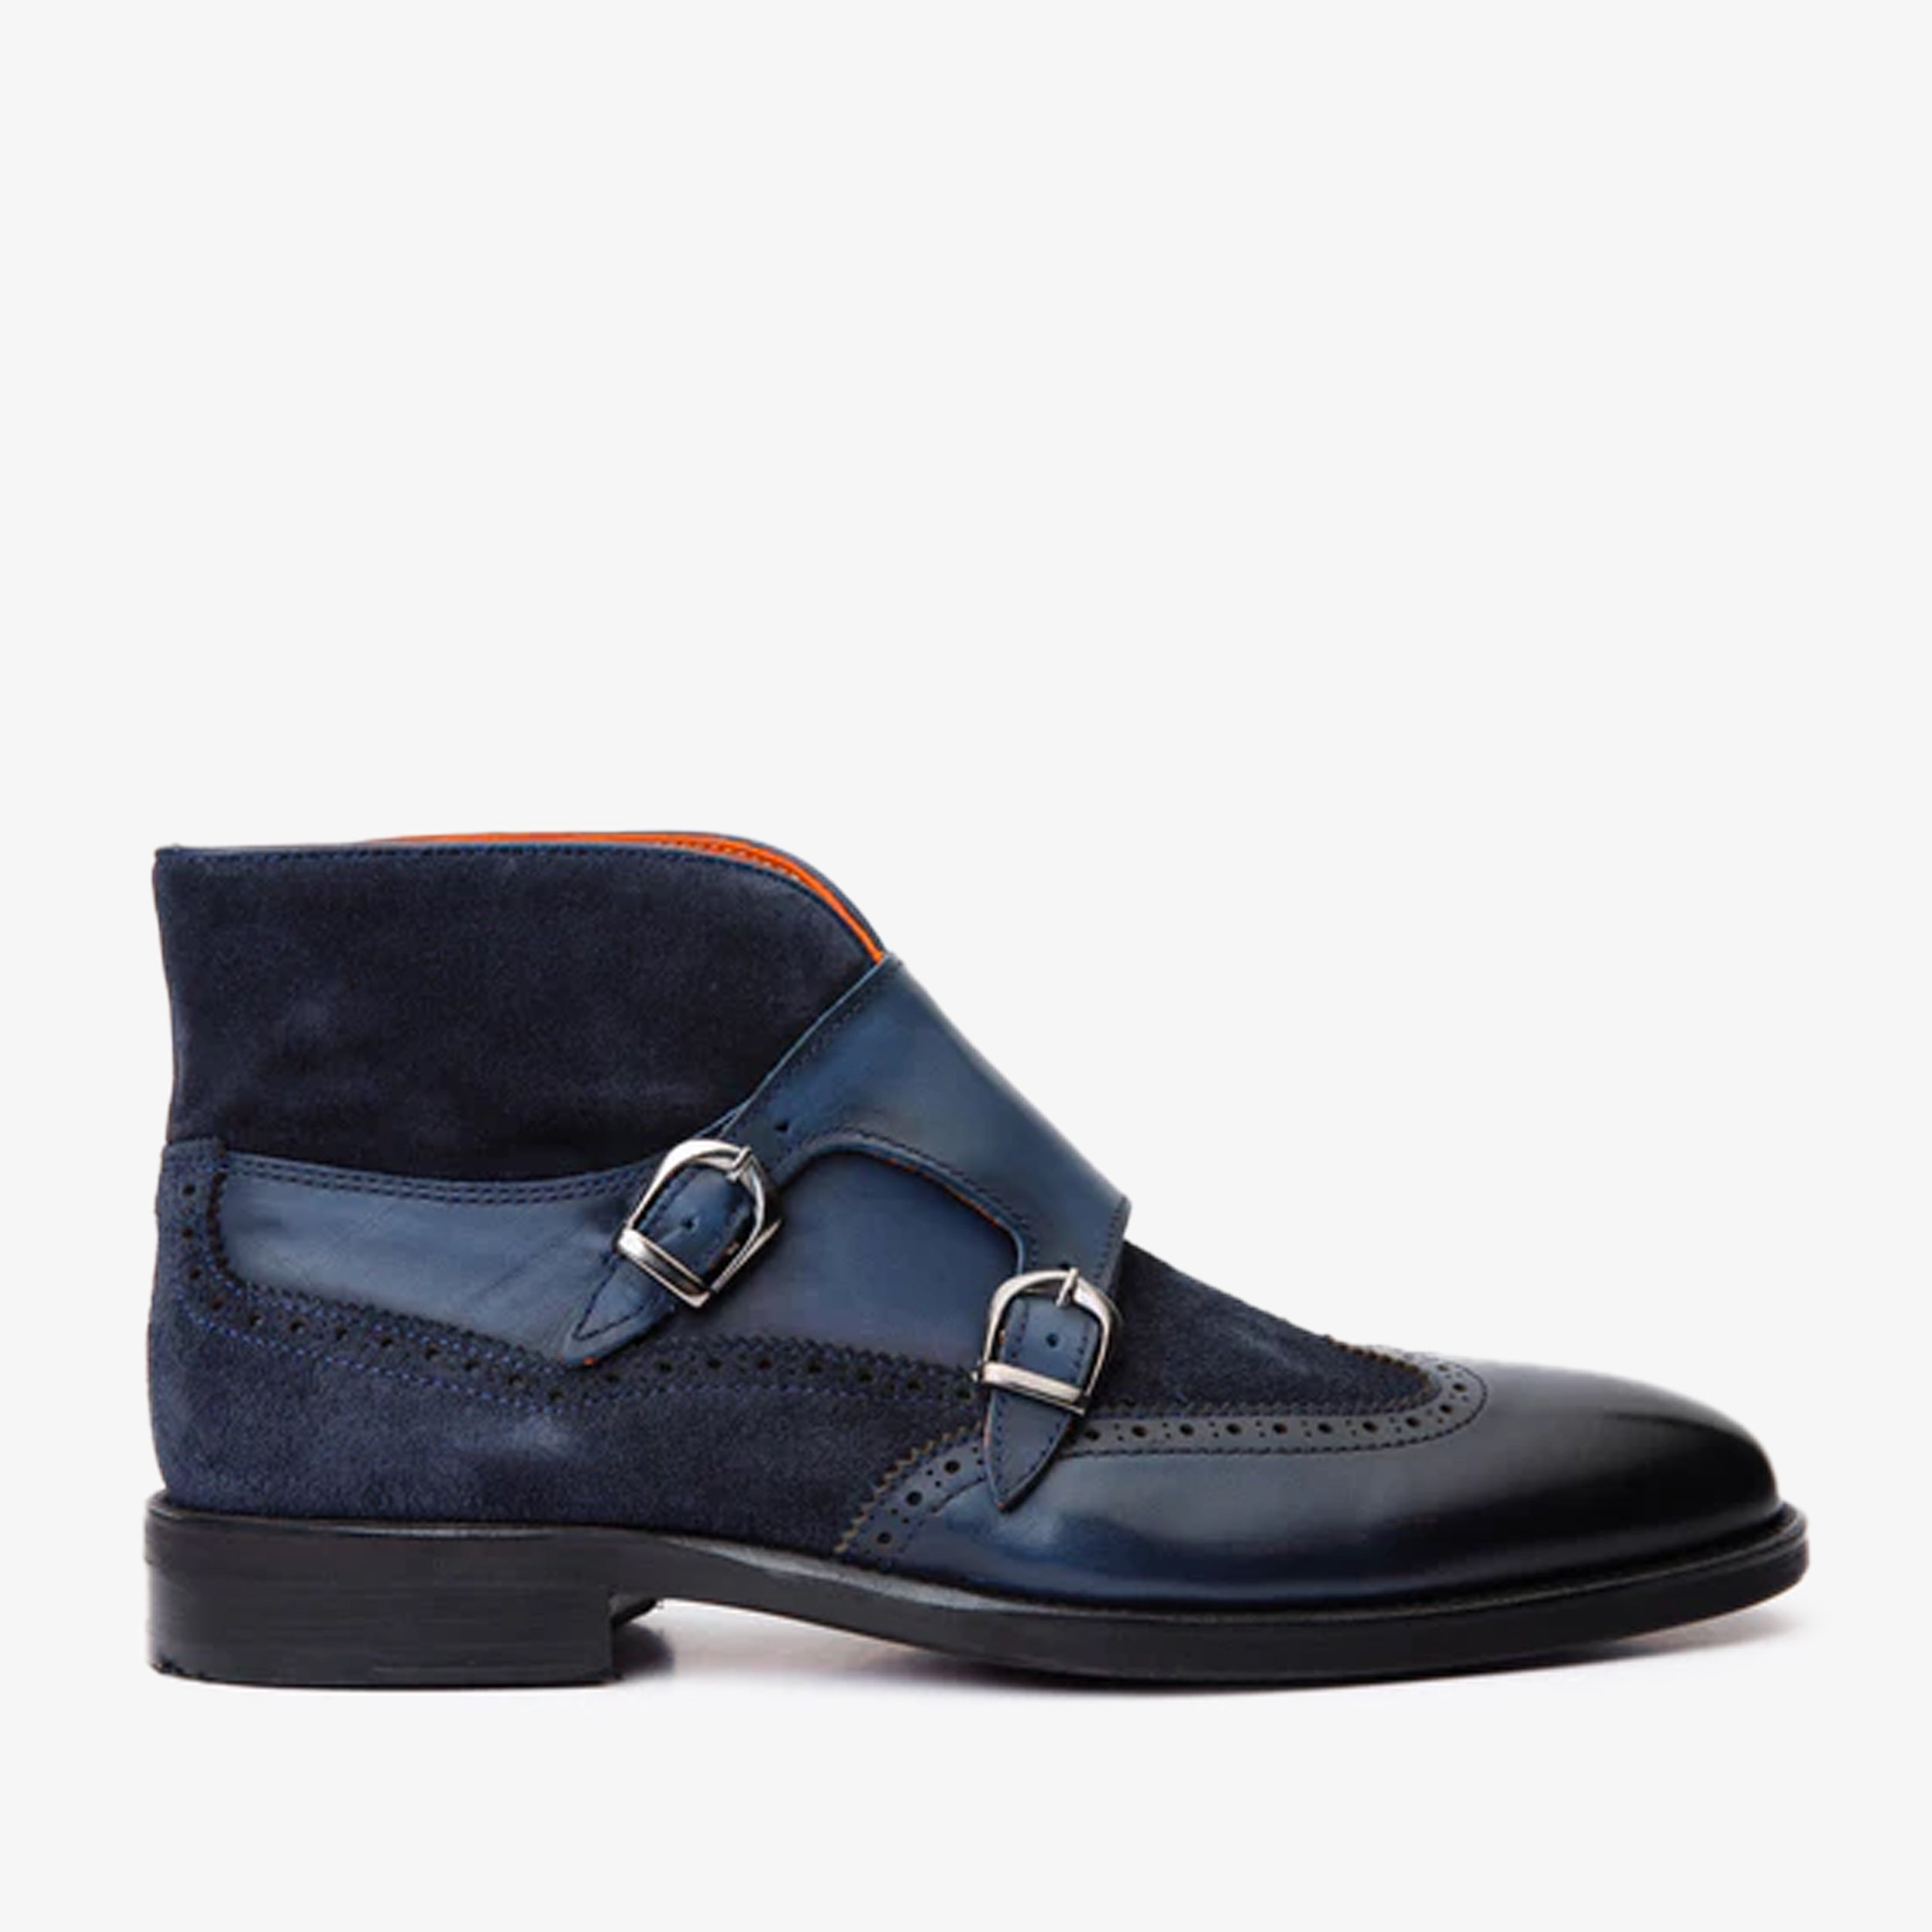 The Albus Navy Blue Leather & Suede Double Strap Monk Brogue Men Boot